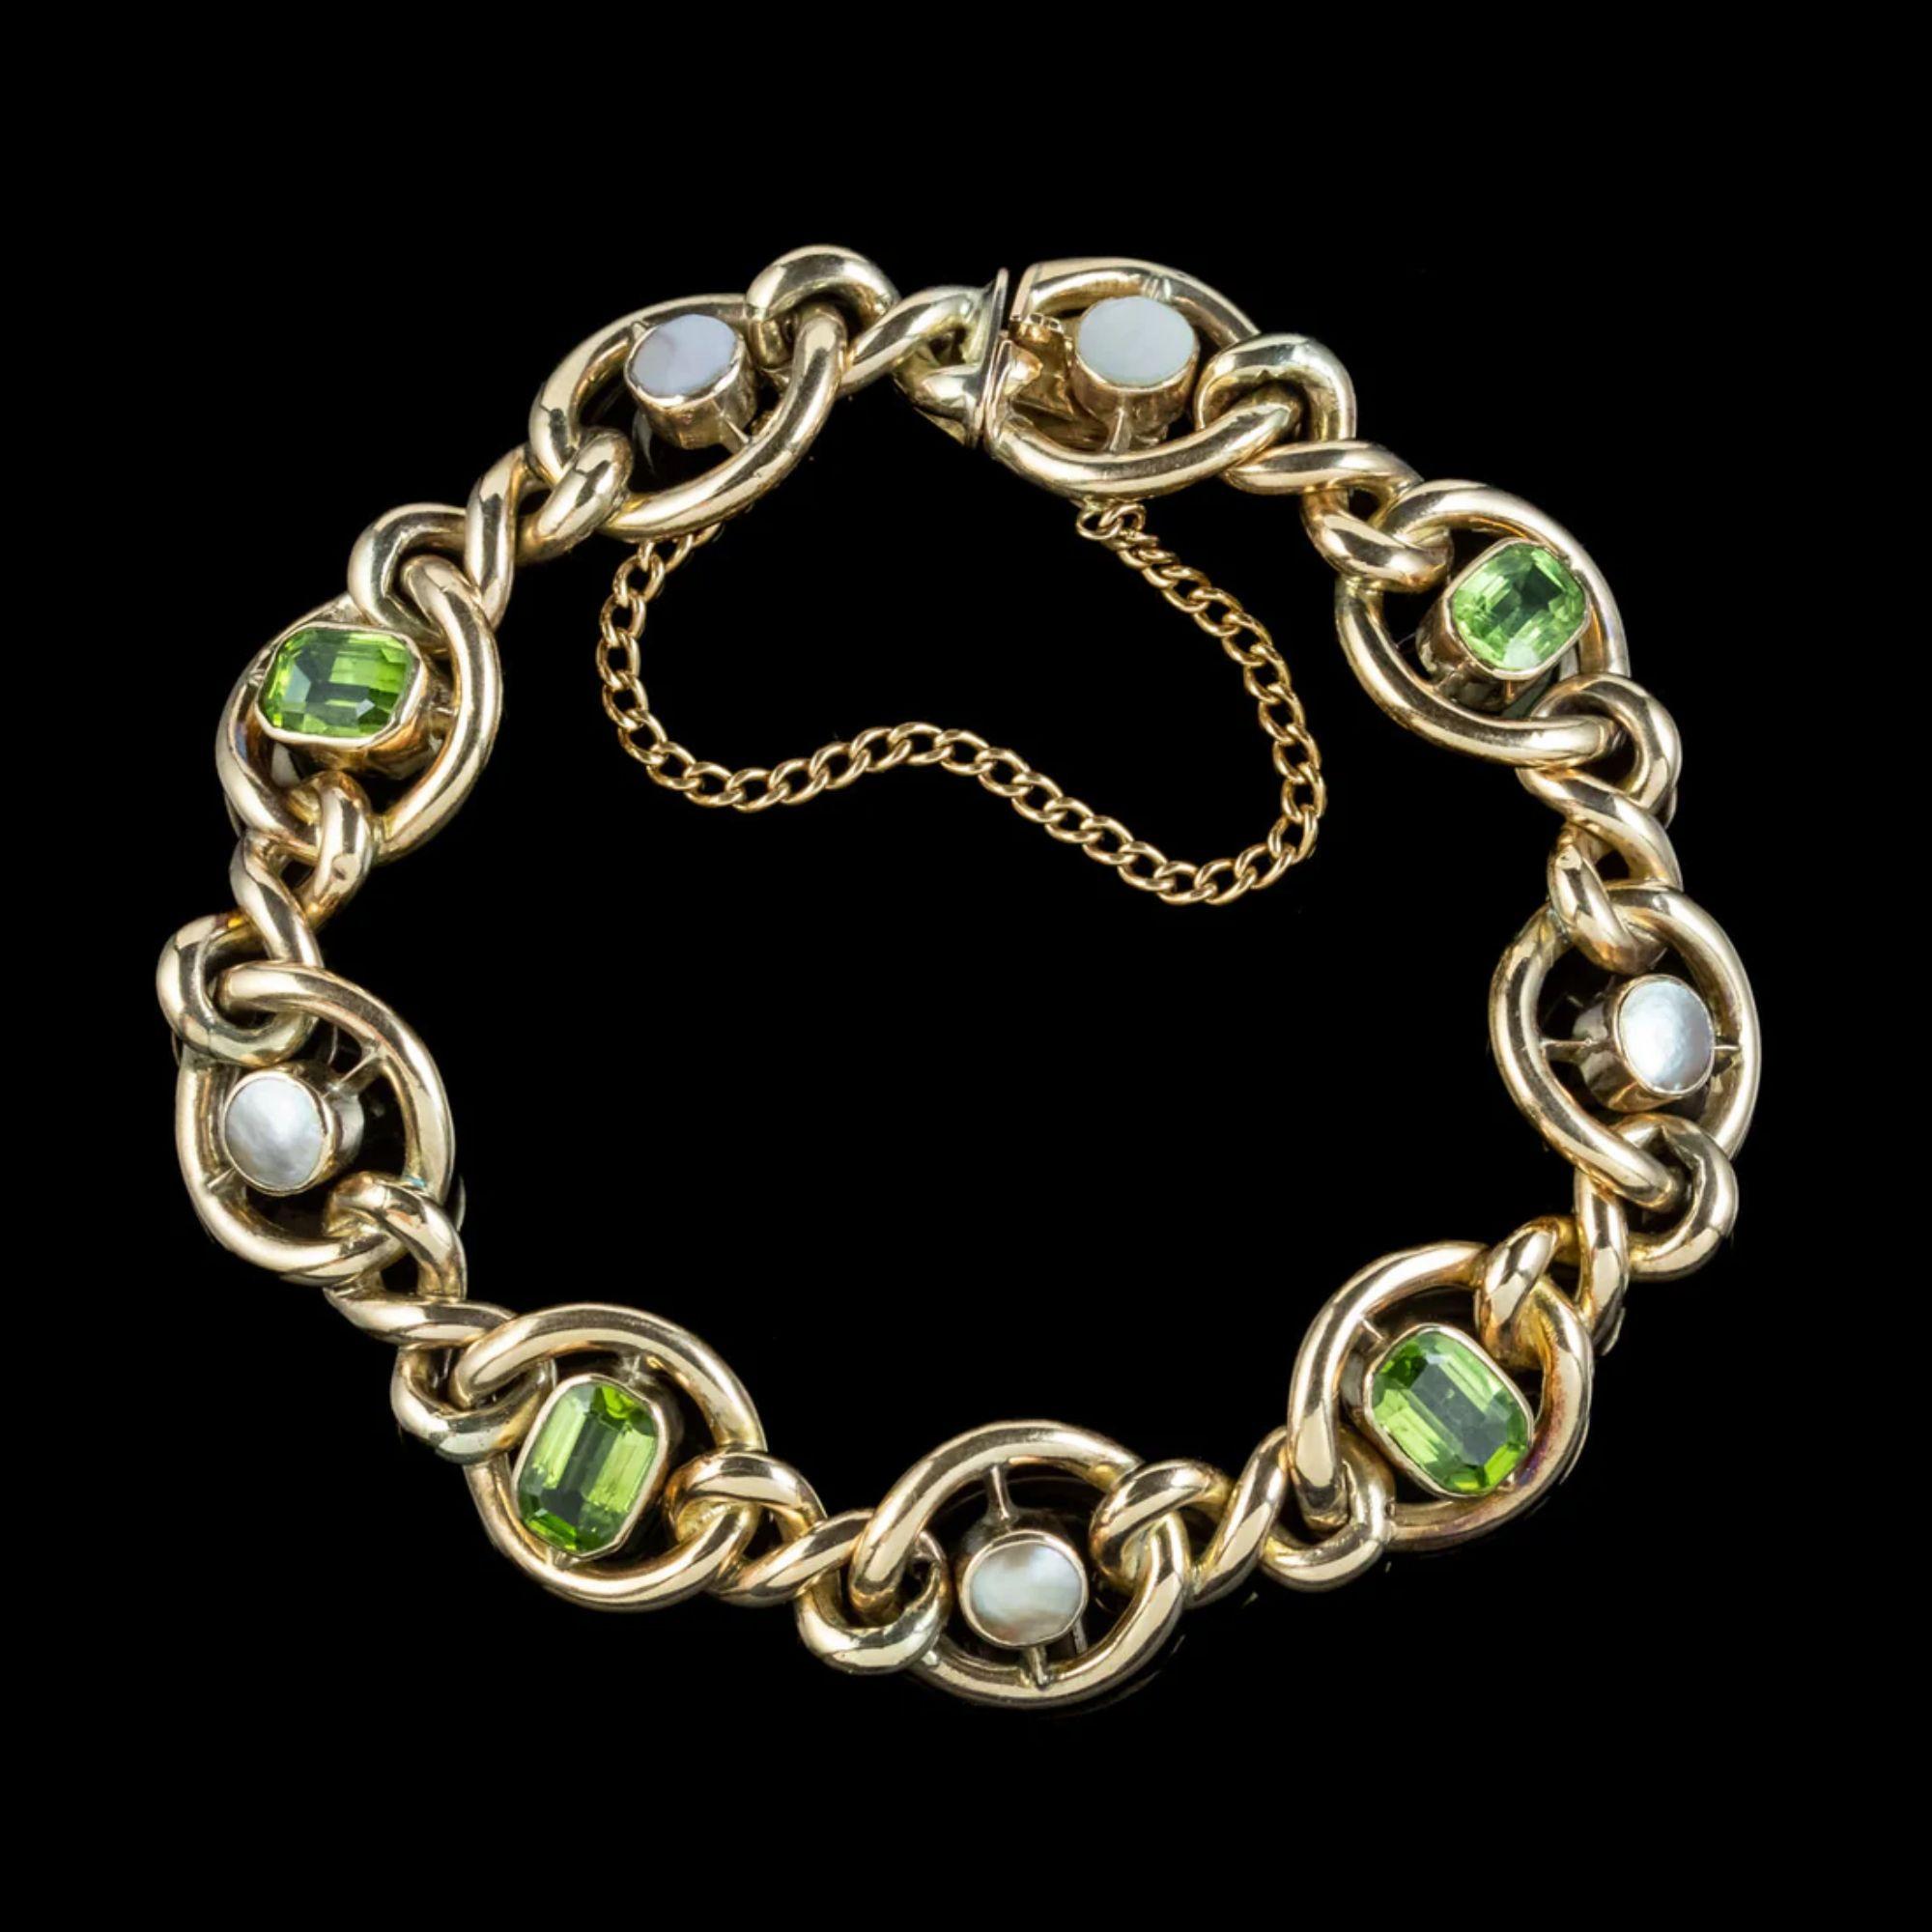 An attractive antique Edwardian curb bracelet fashioned in solid 9ct gold with four emerald cut peridots and four iridescent mabe pearls bezel set in the centre of each of the larger links.

Peridots are seen as a stone of springtime, a gift from